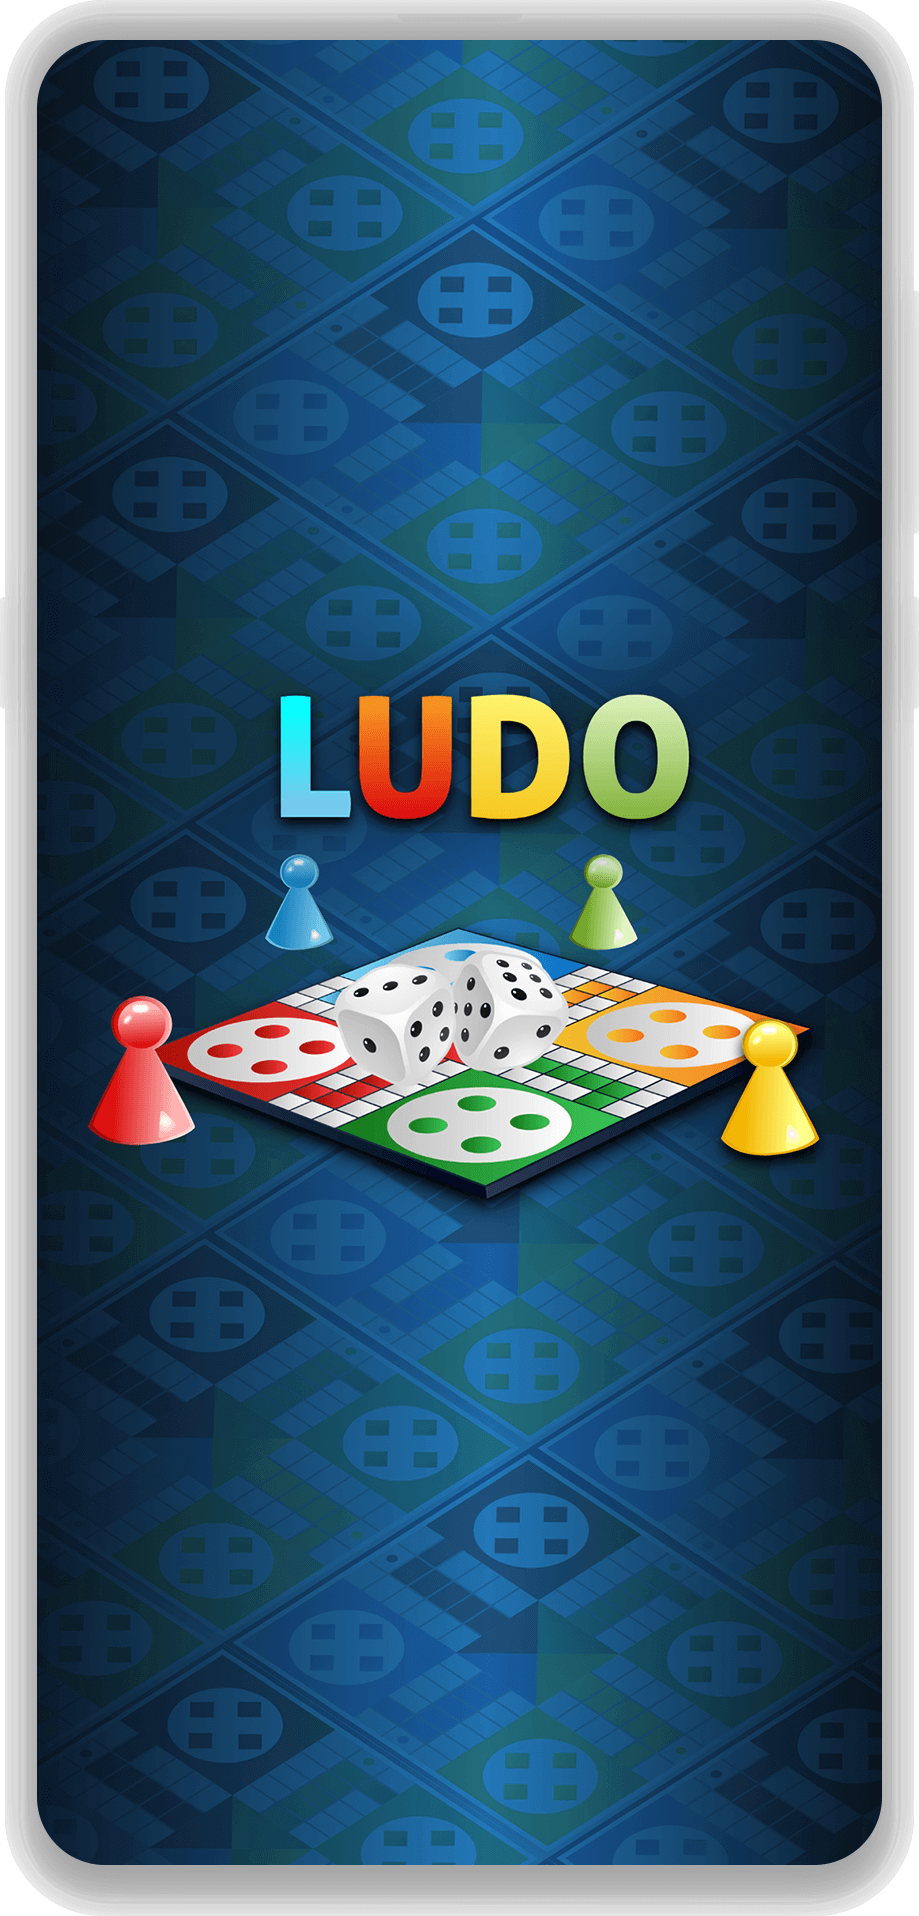 Ludo Online Multiplayer - Unity3D 